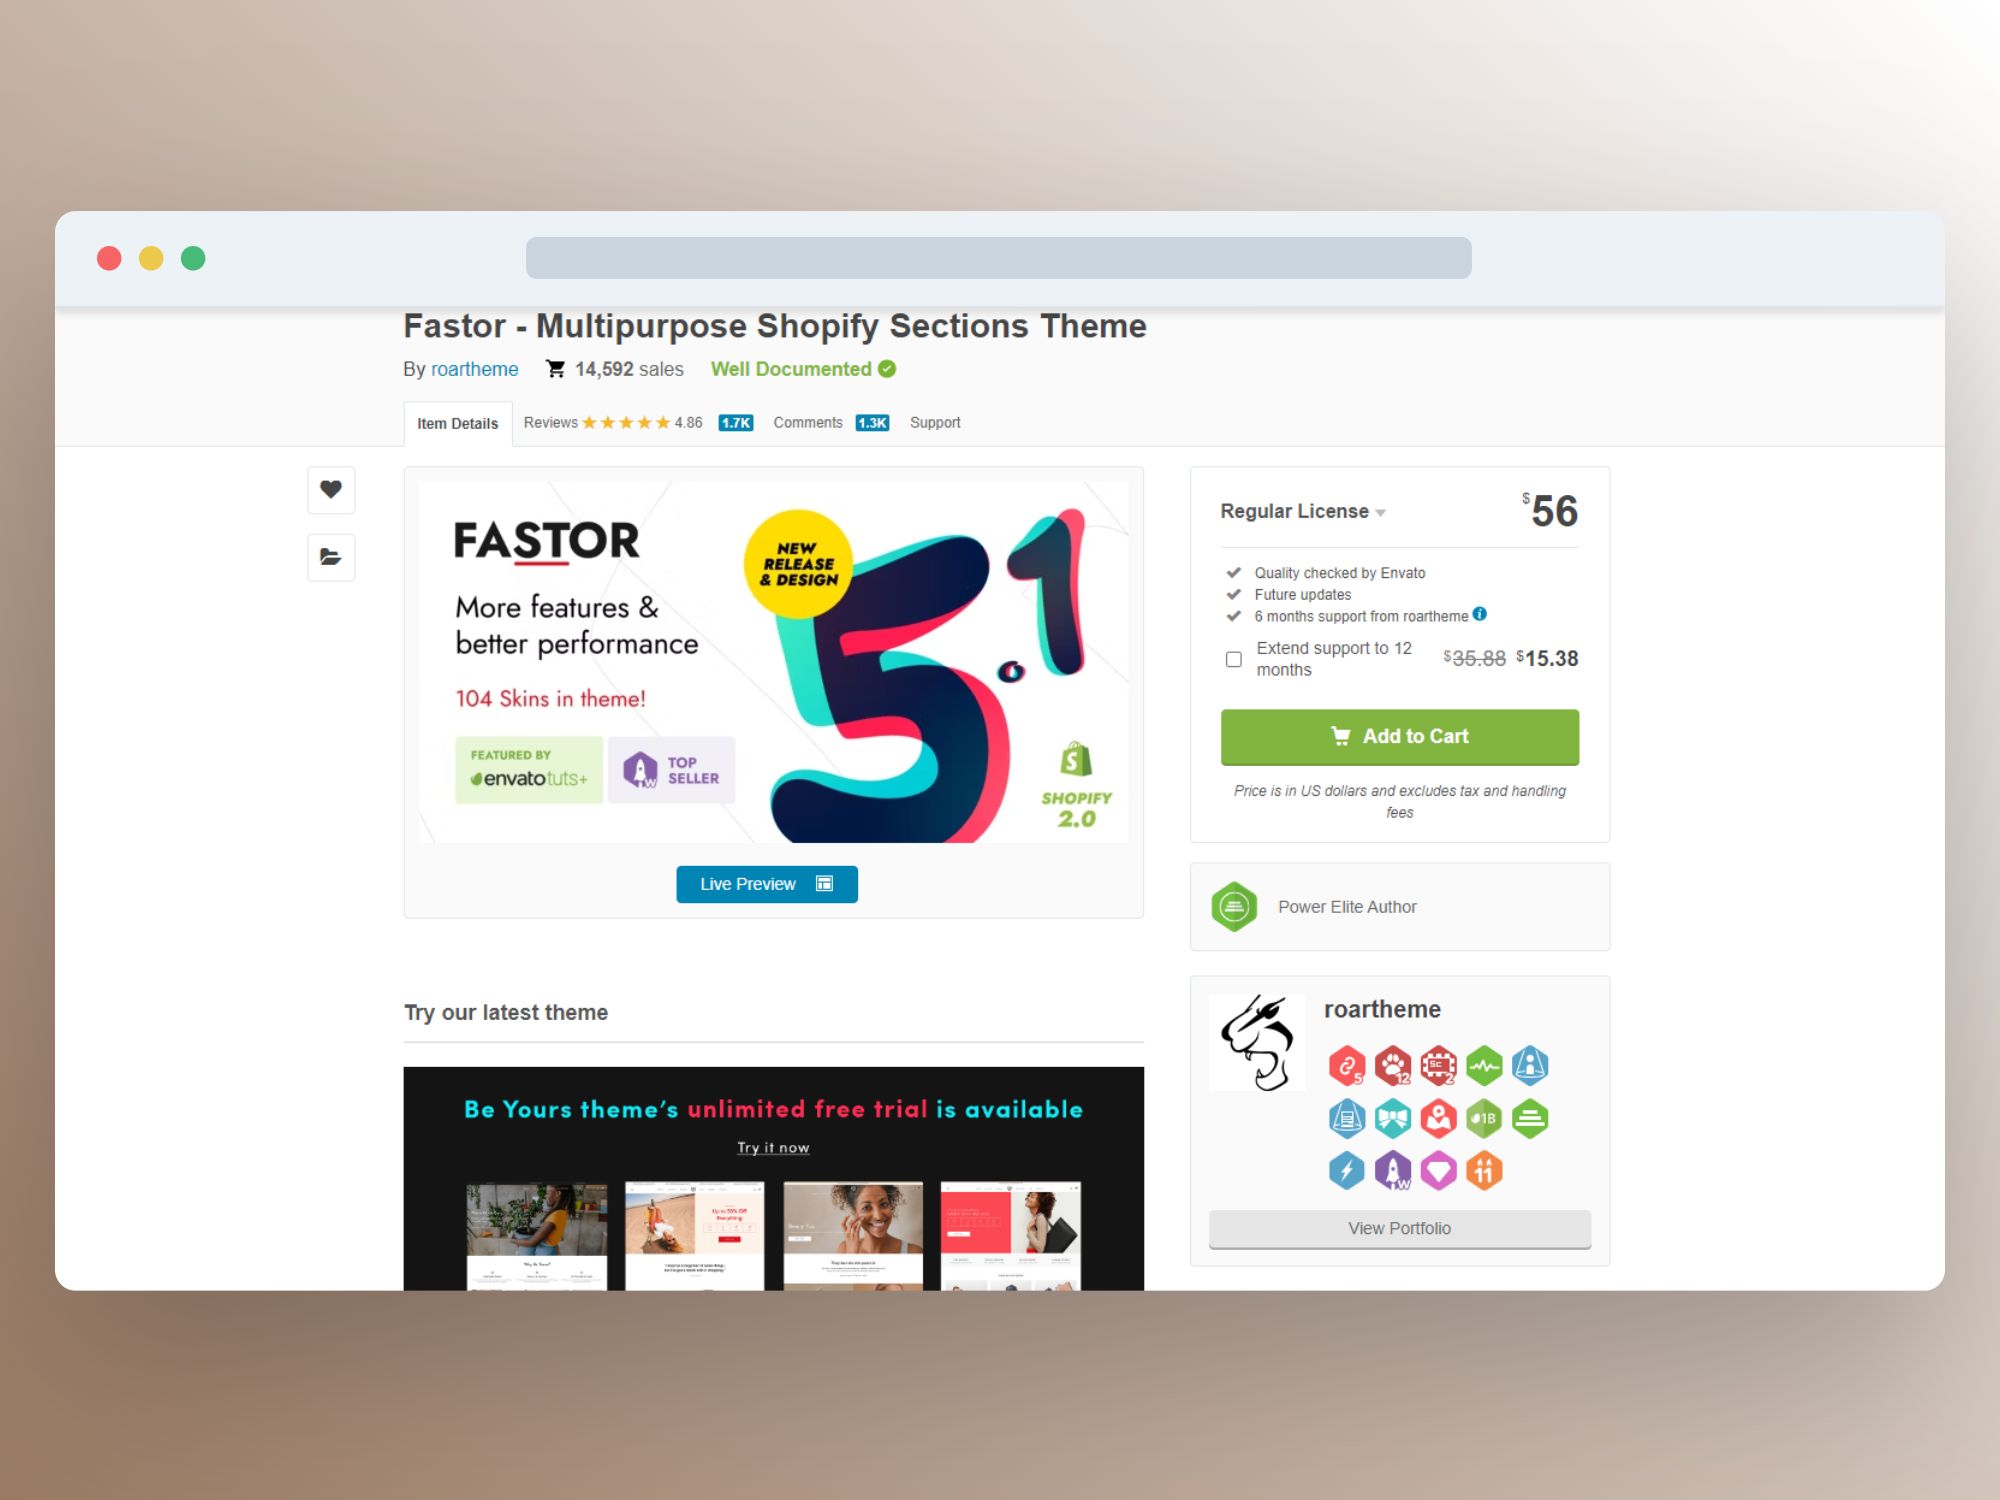 Booster - Multipurpose Supermarket Shopify 2.0 Theme by theme-peach